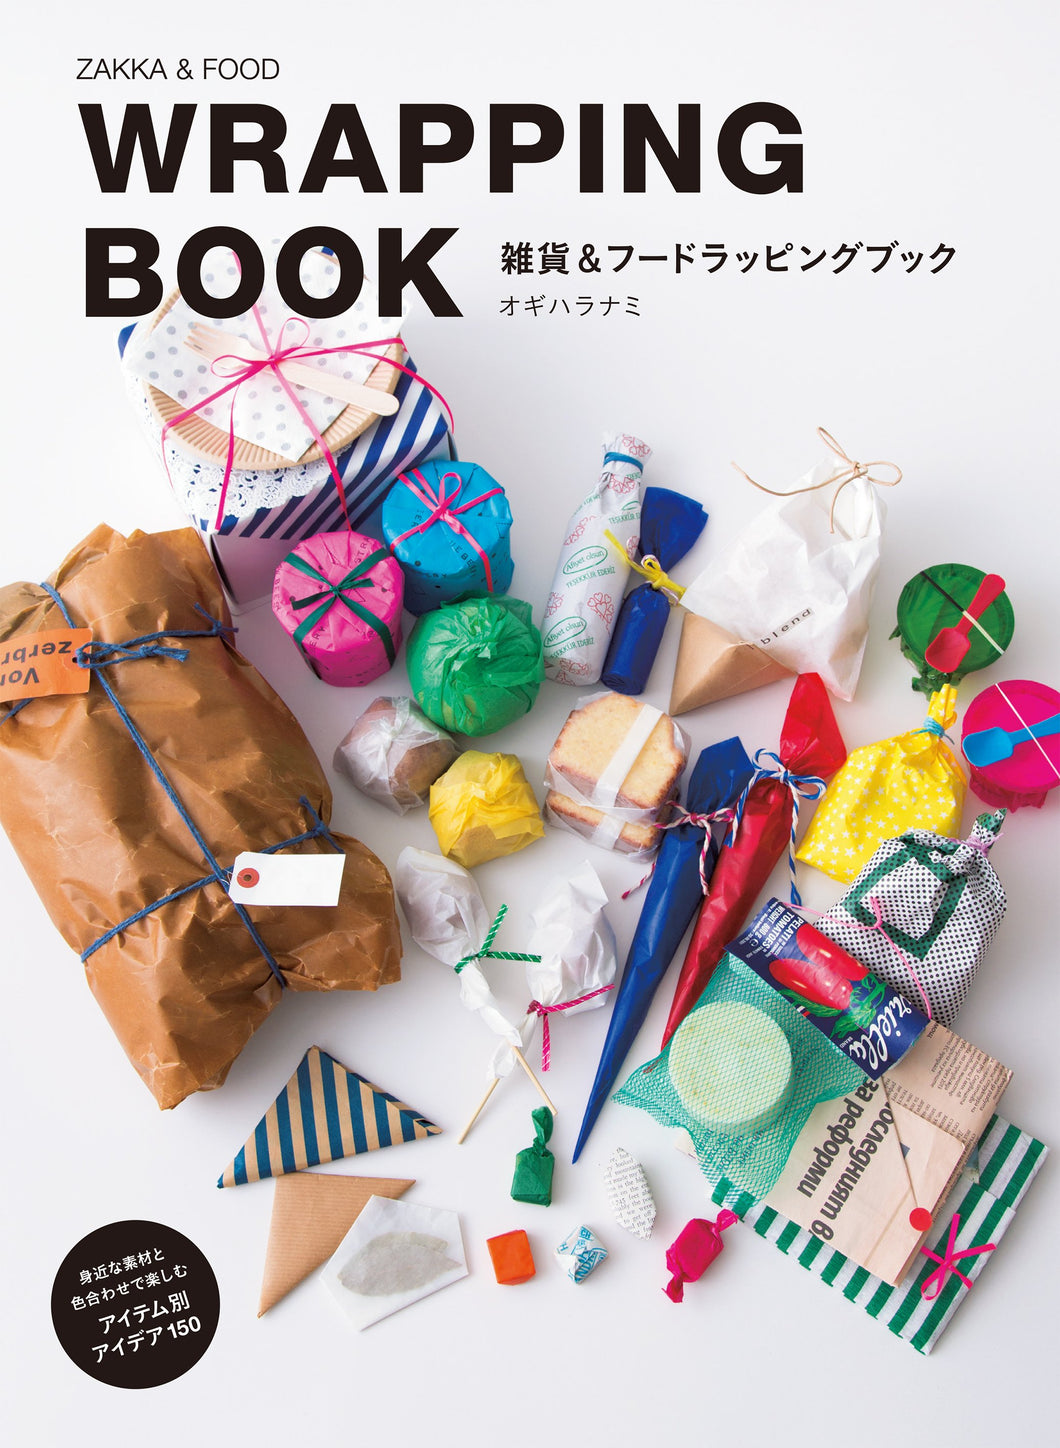 Miscellaneous Goods & Food Wrapping Book